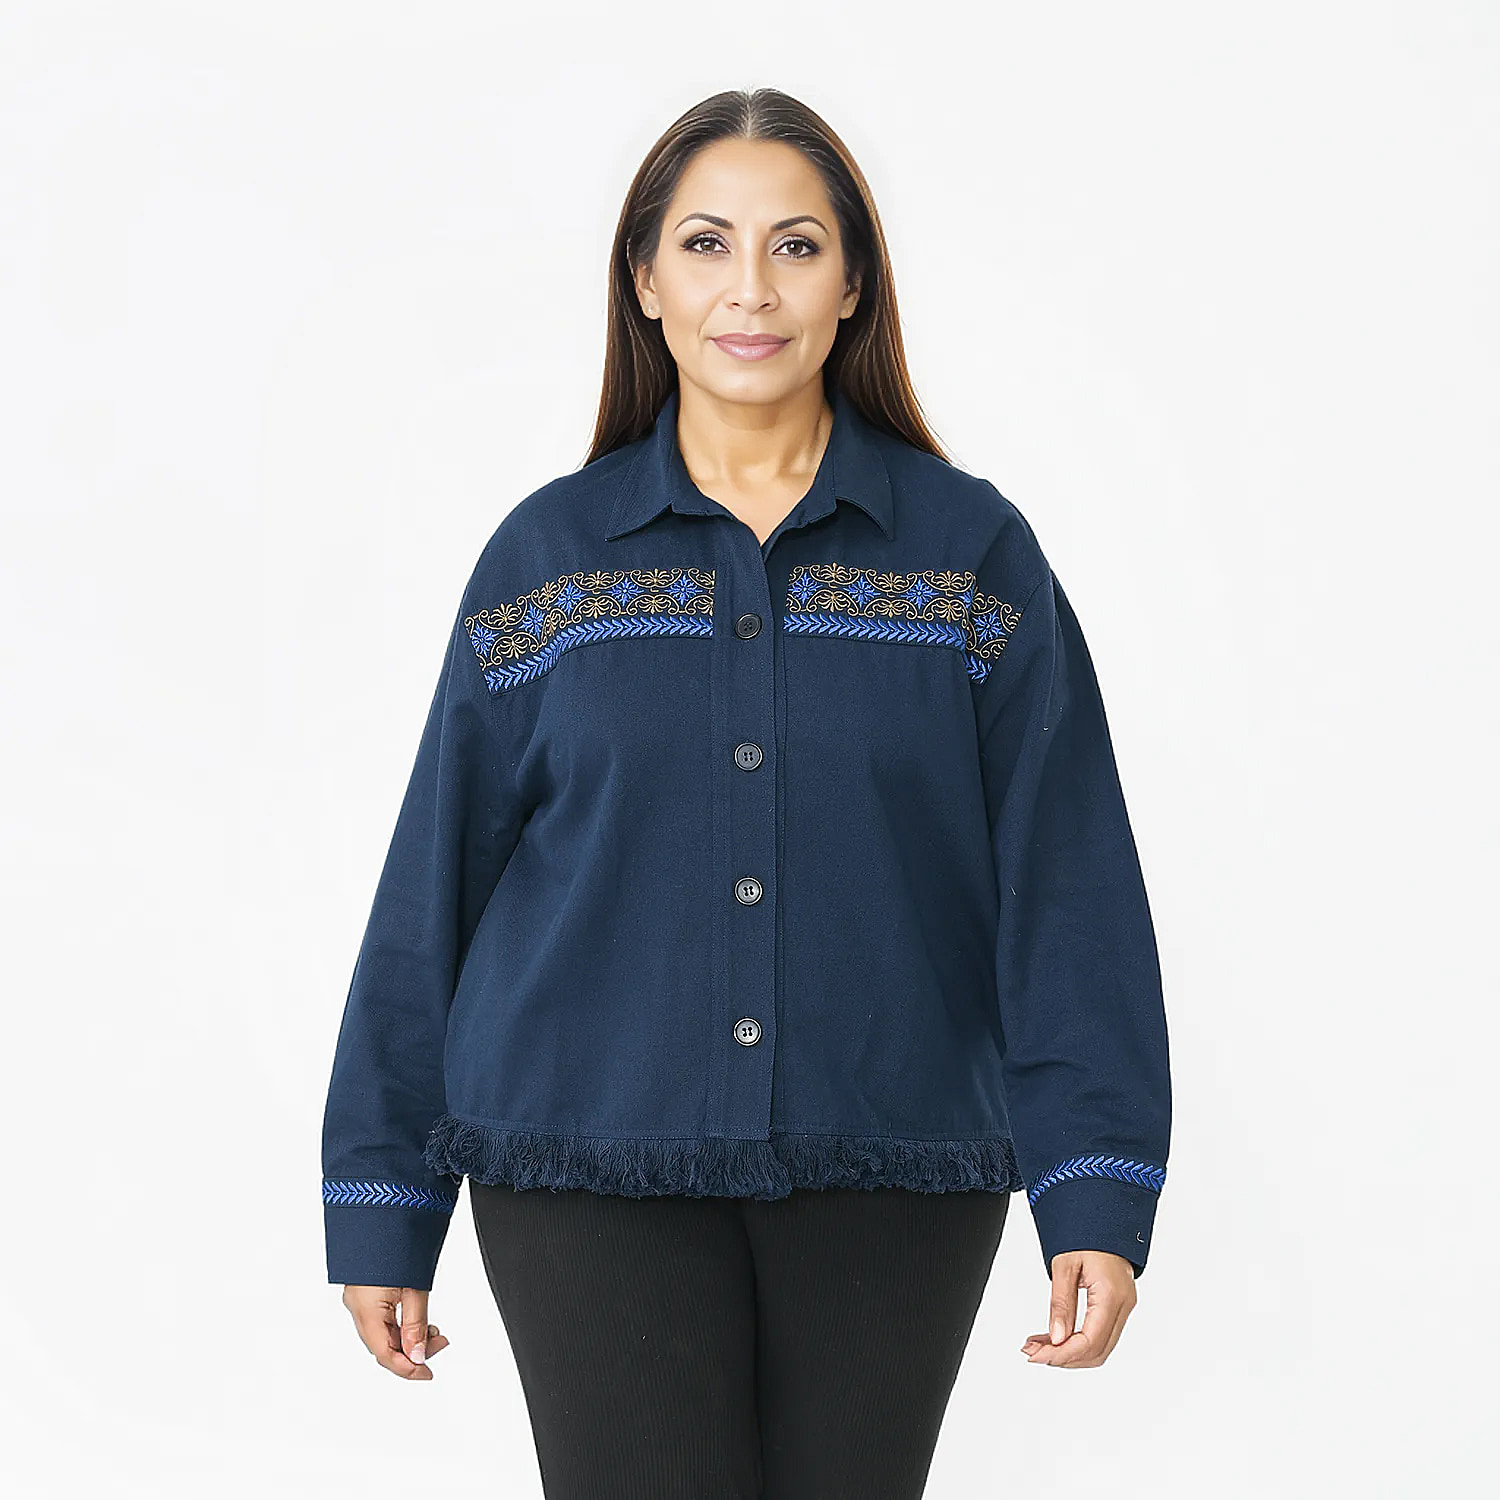 Tamsy 100% Cotton Embroidered Jacket (Size M,12-14) - Navy